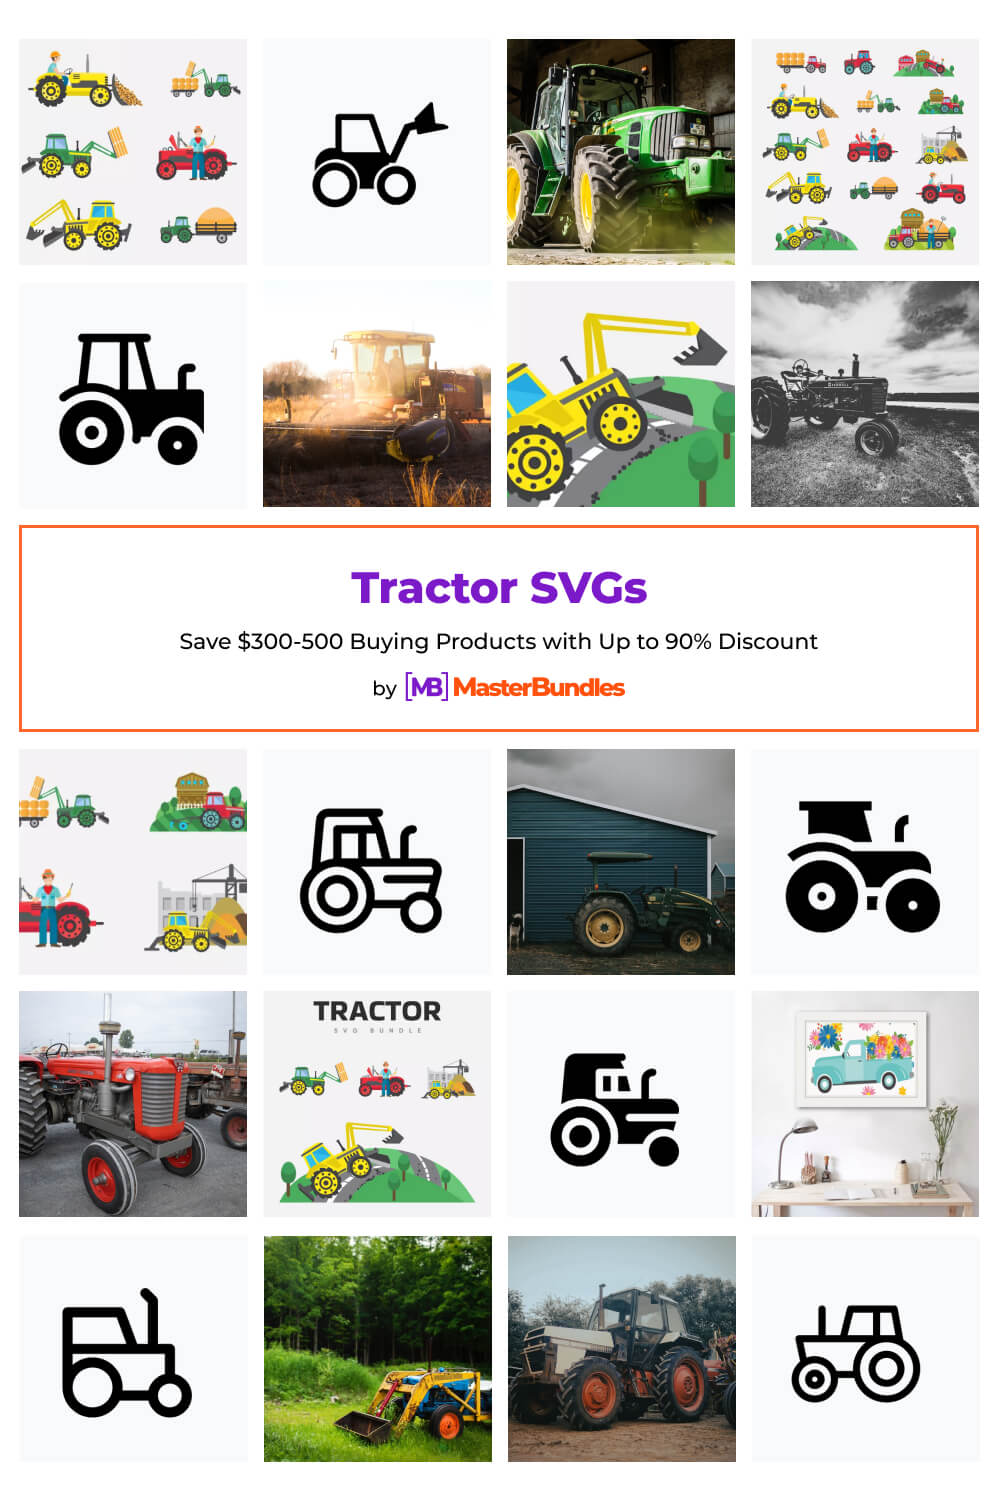 tractor svgs pinterest image.